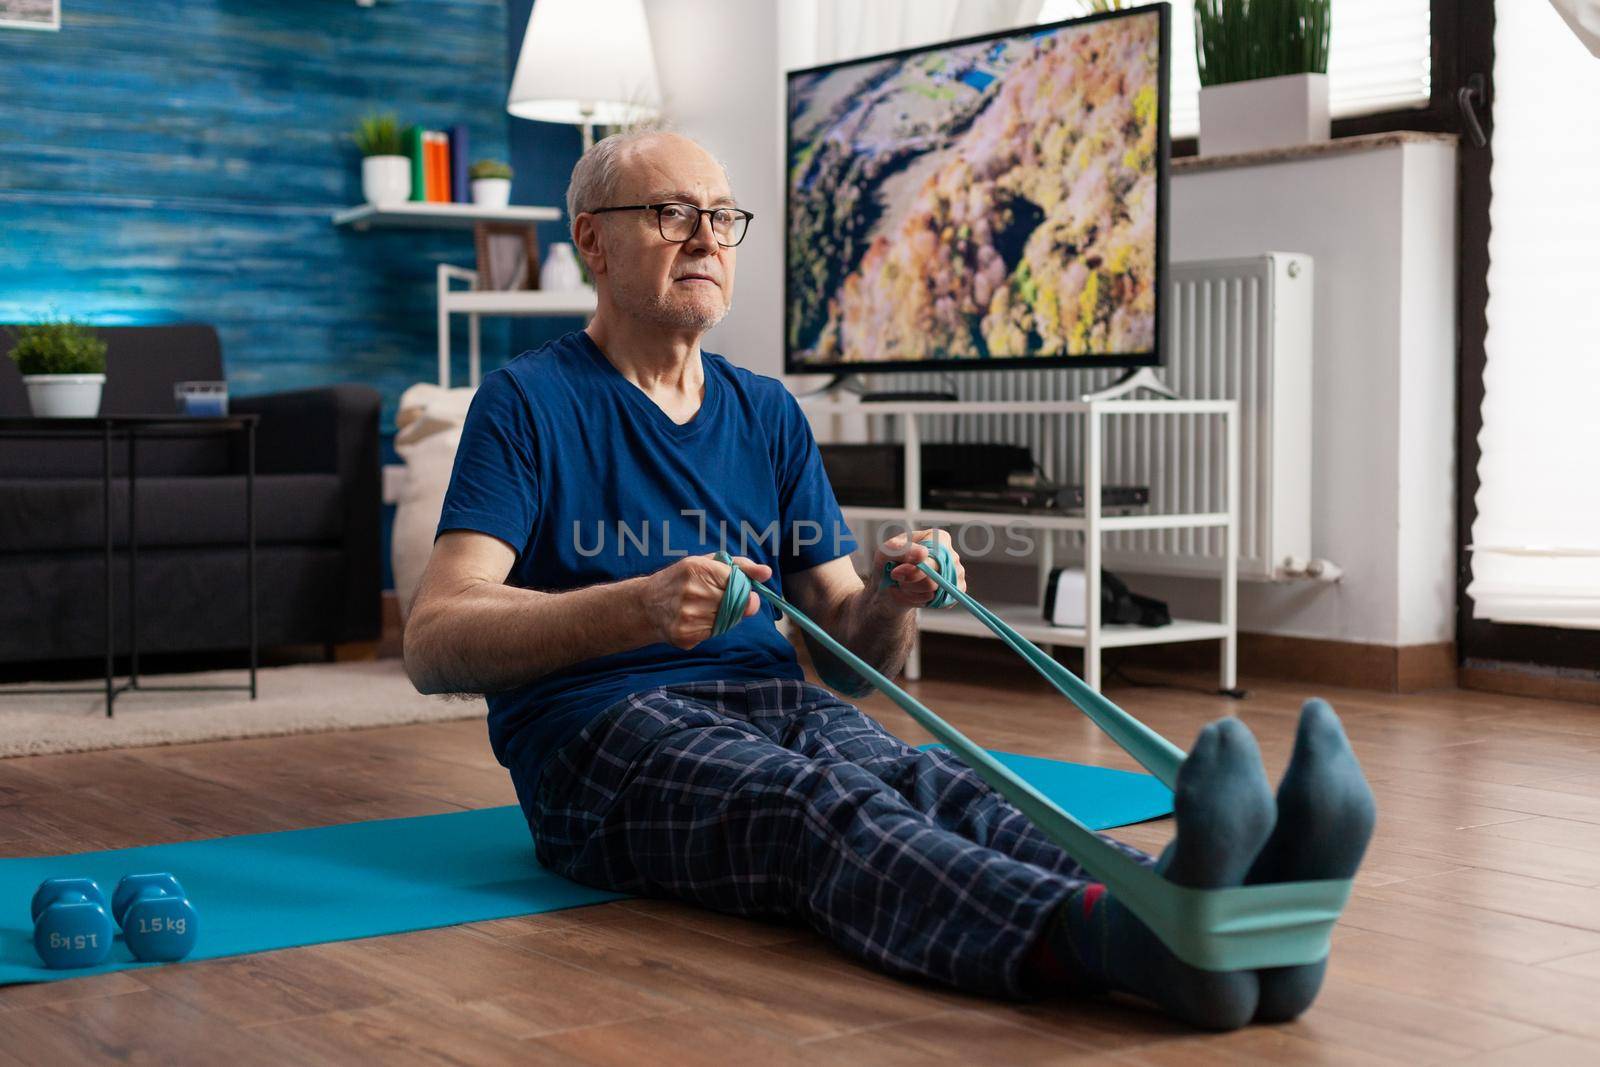 Retirement senior man sitting on yoga mat stretching legs muscles using resistance elastic band training body flexibility. Pensioner in sportswear slimming weight during muscle training in living room